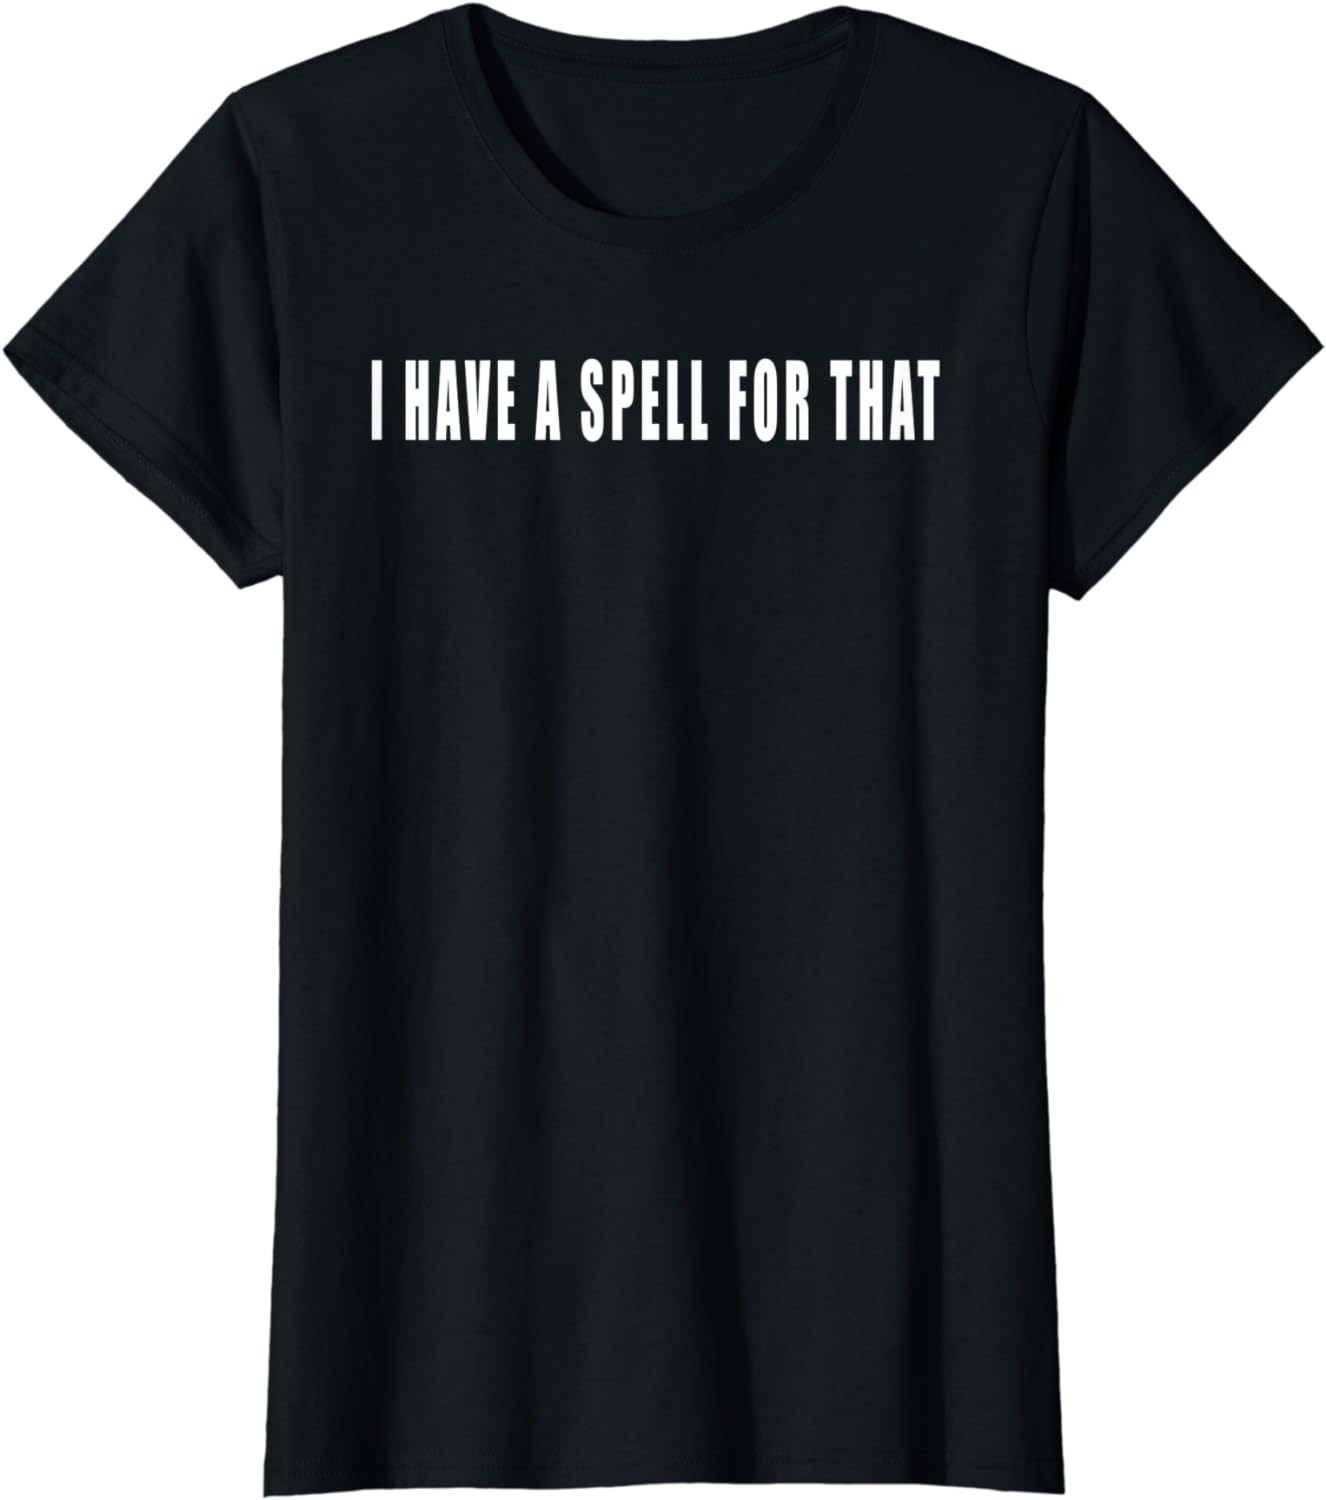 Witch T-Shirt For Witches, Wiccans, And Pagans